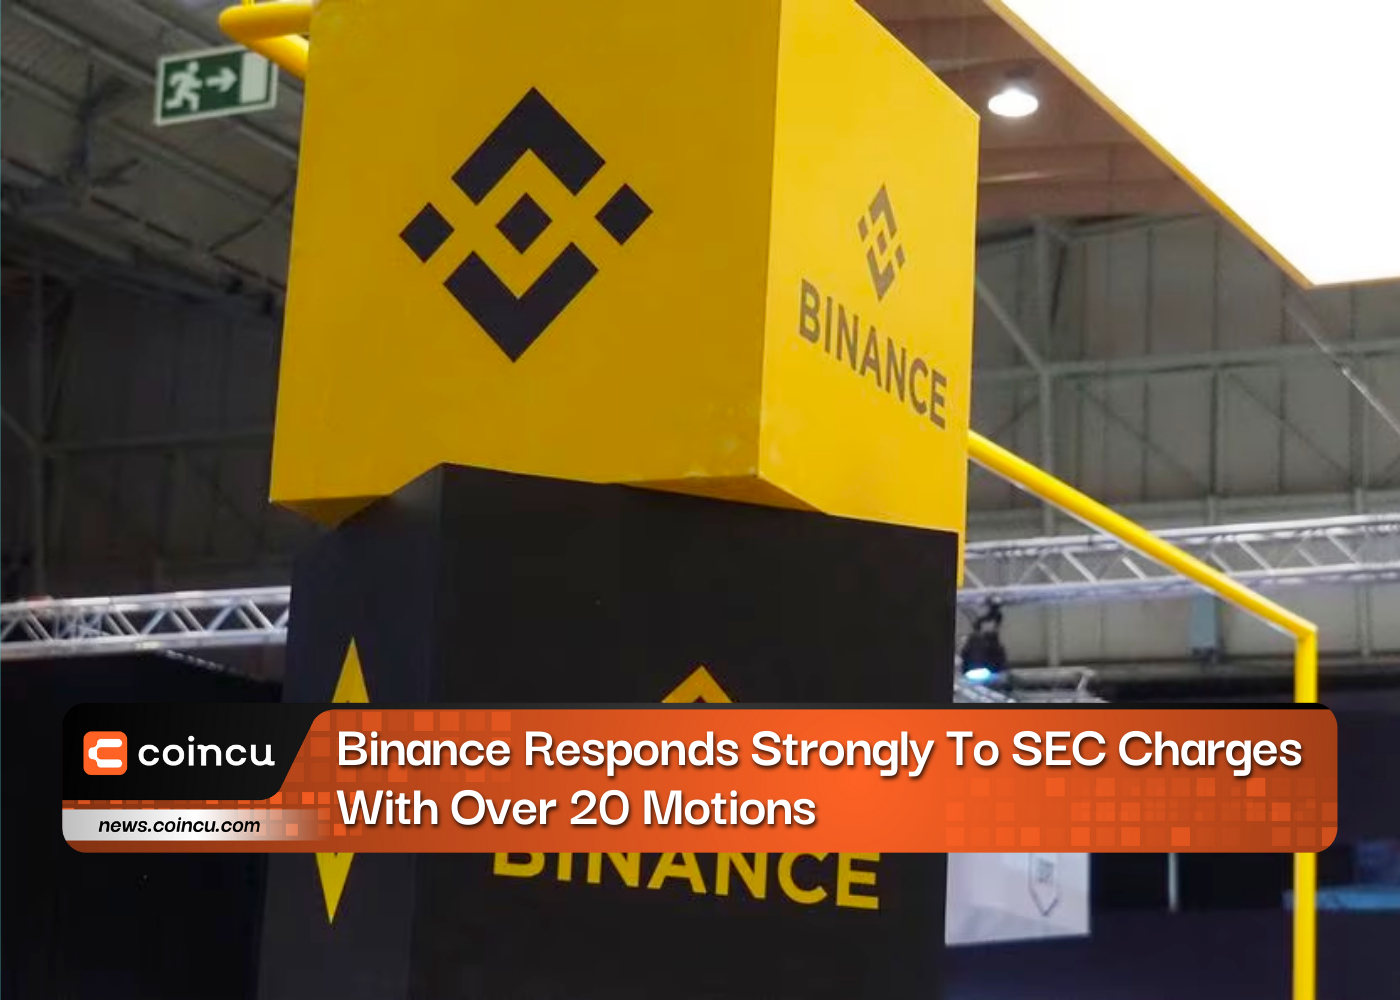 Binance Responds Strongly To SEC Charges With Over 20 Motions